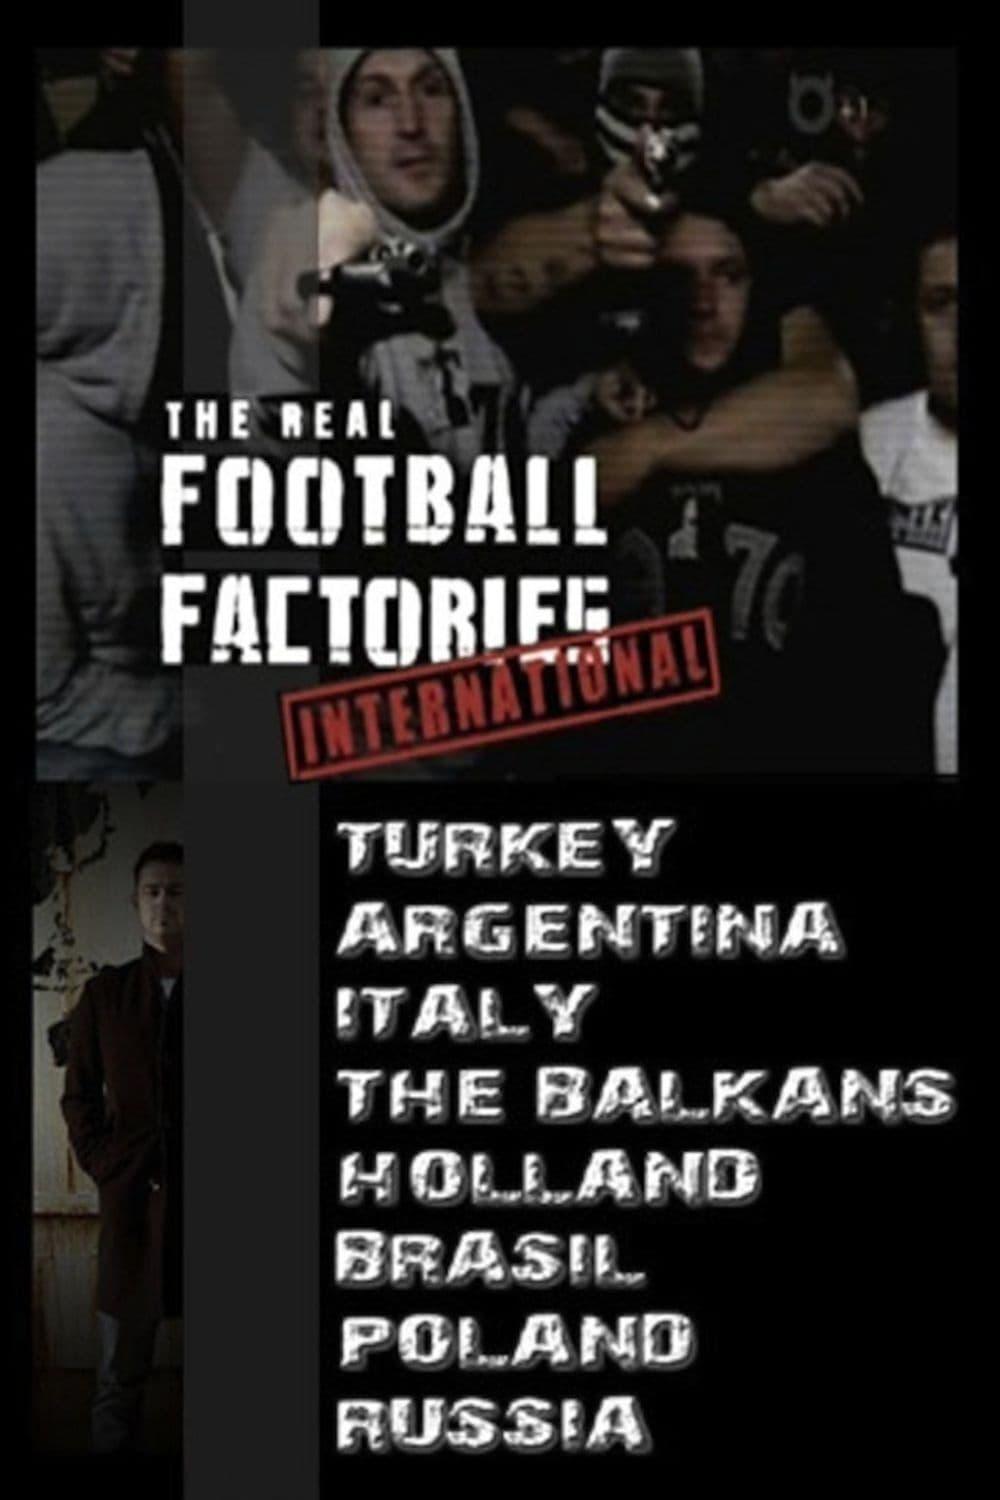 The Real Football Factories International poster